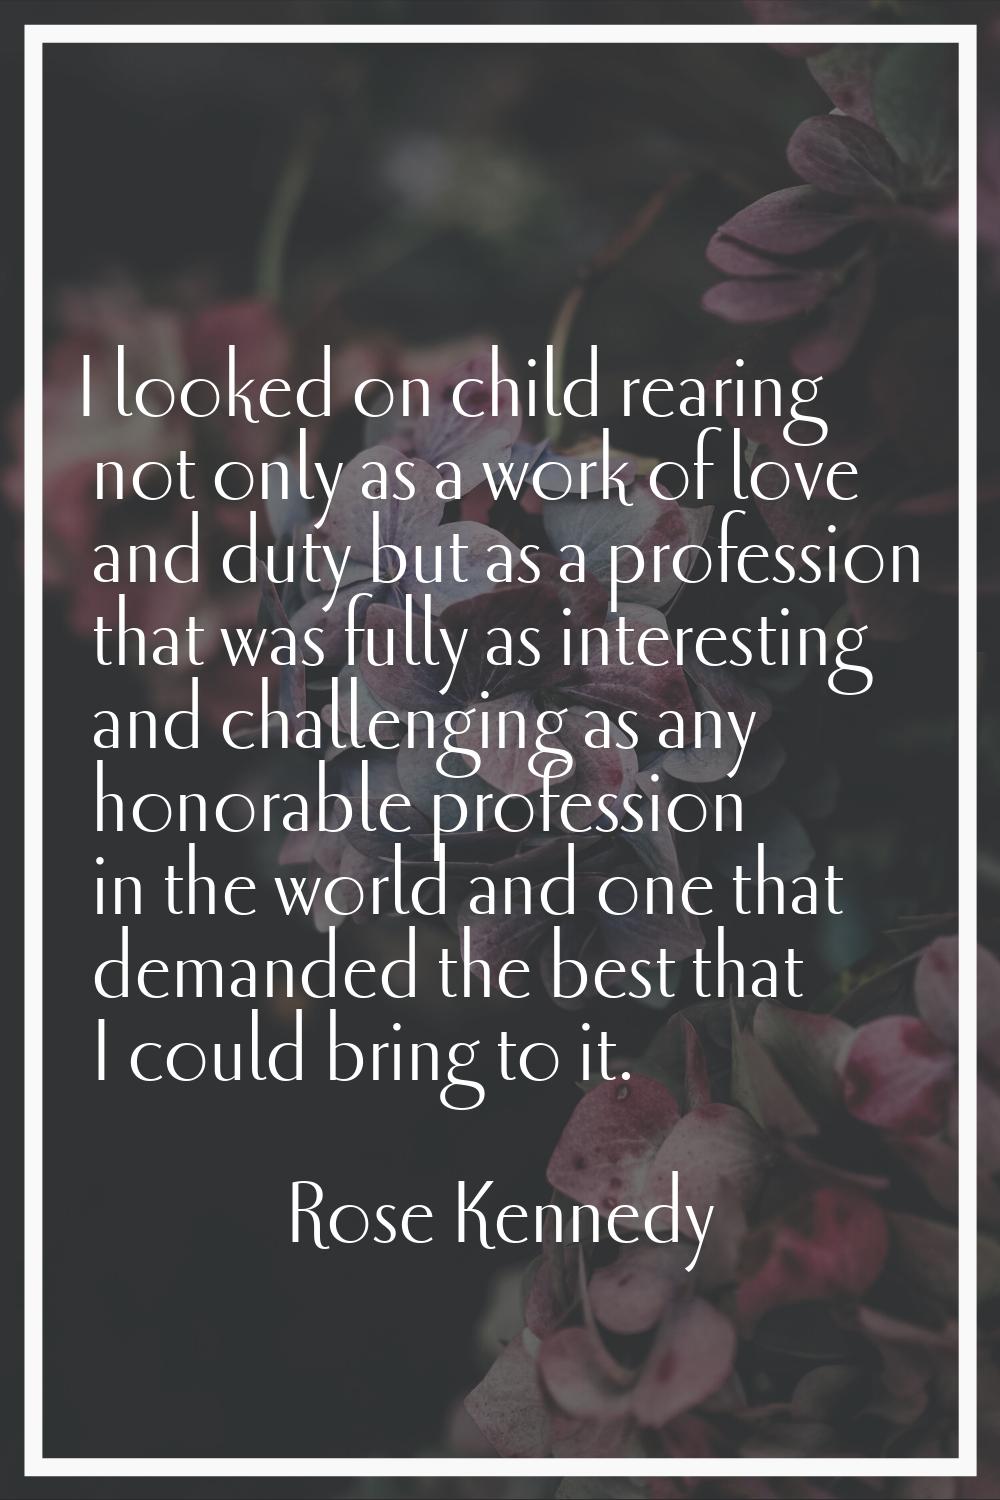 I looked on child rearing not only as a work of love and duty but as a profession that was fully as